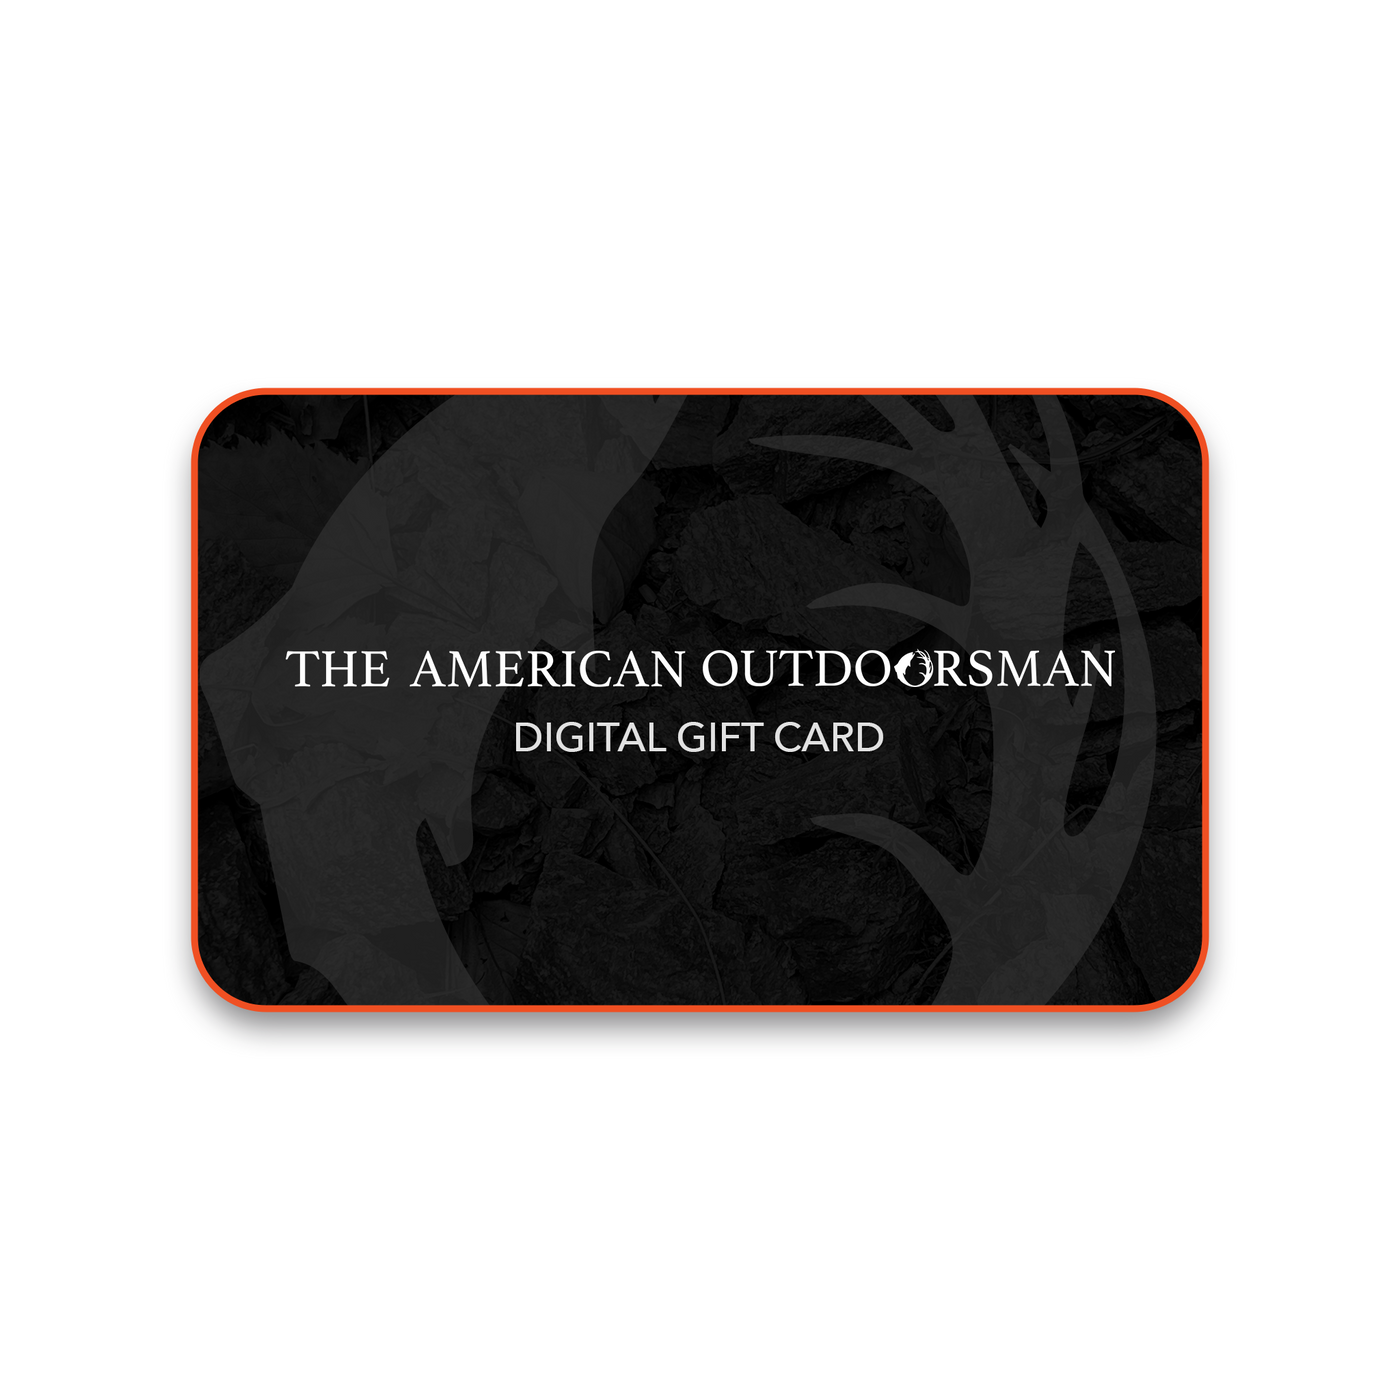 The American Outdoorsman Gift Card